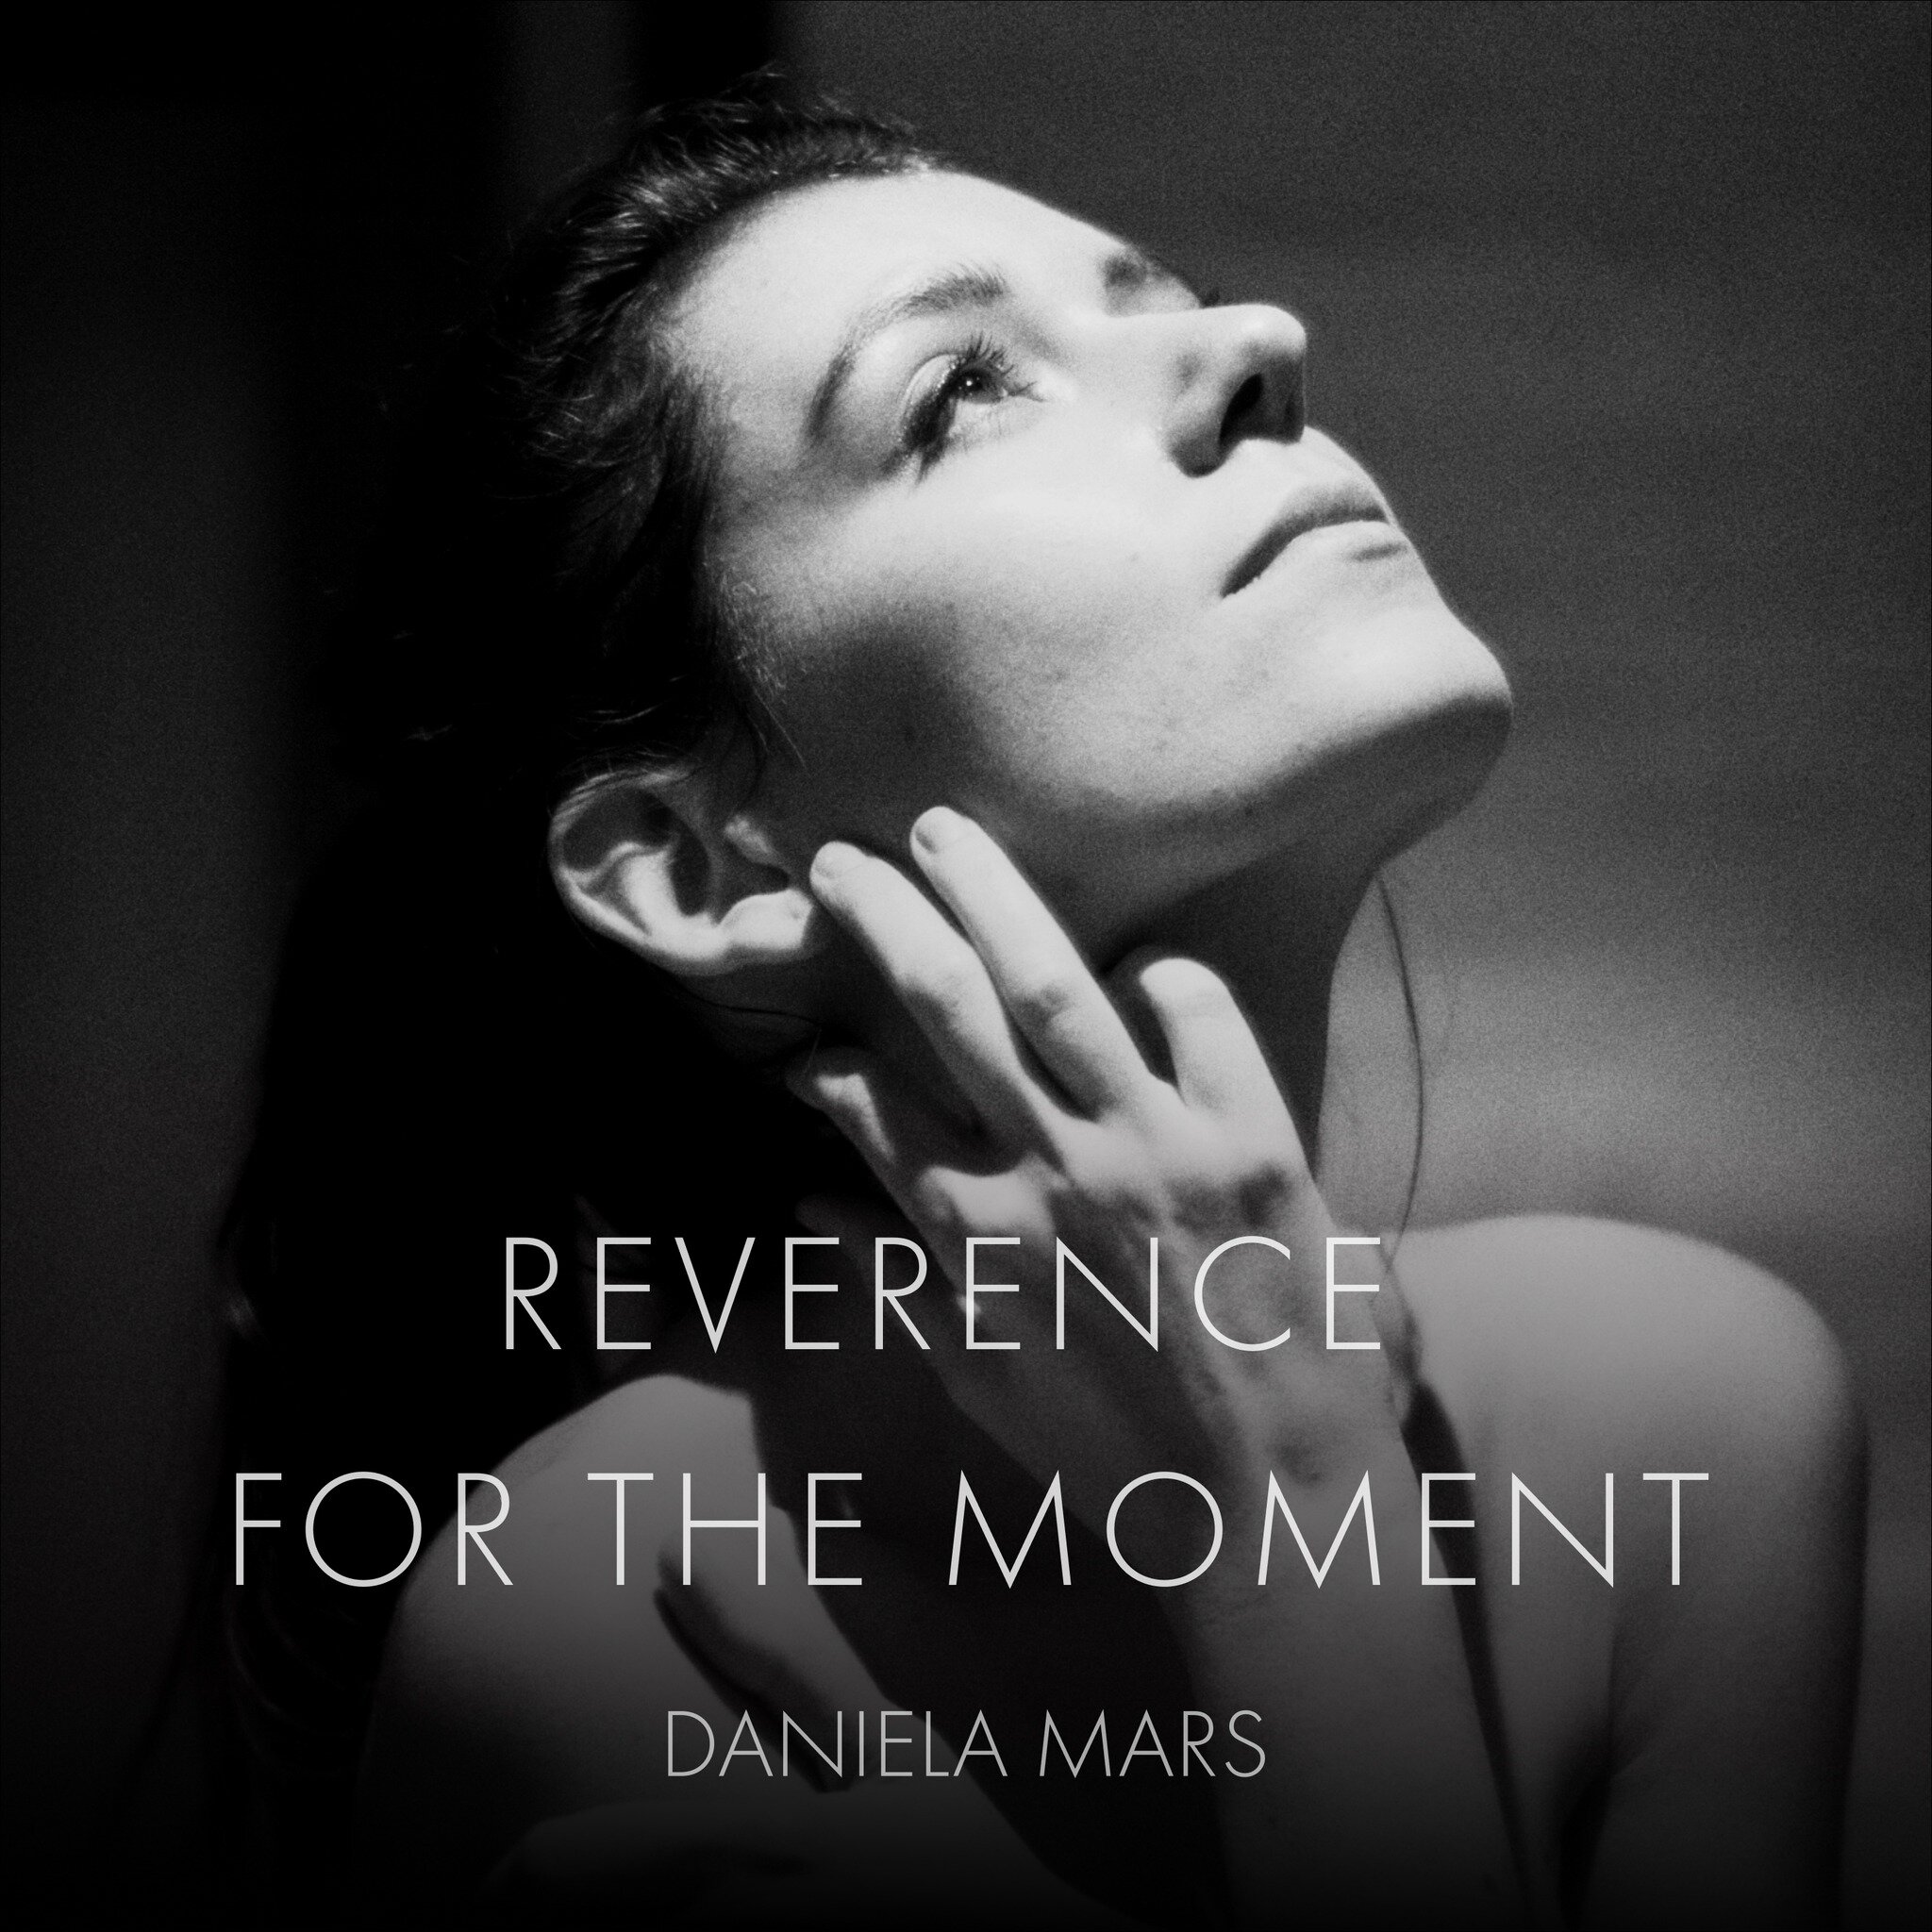 ⭐️ NEW MUSIC FRIDAY ⭐️
Daniela Mars' new album 'Reverence for the Moment' is out now on #VOCES8Records! 

Harnessing the beautiful textures and timbres of low flutes, the album is a contemporary book of hours to reflect and connect through moments of